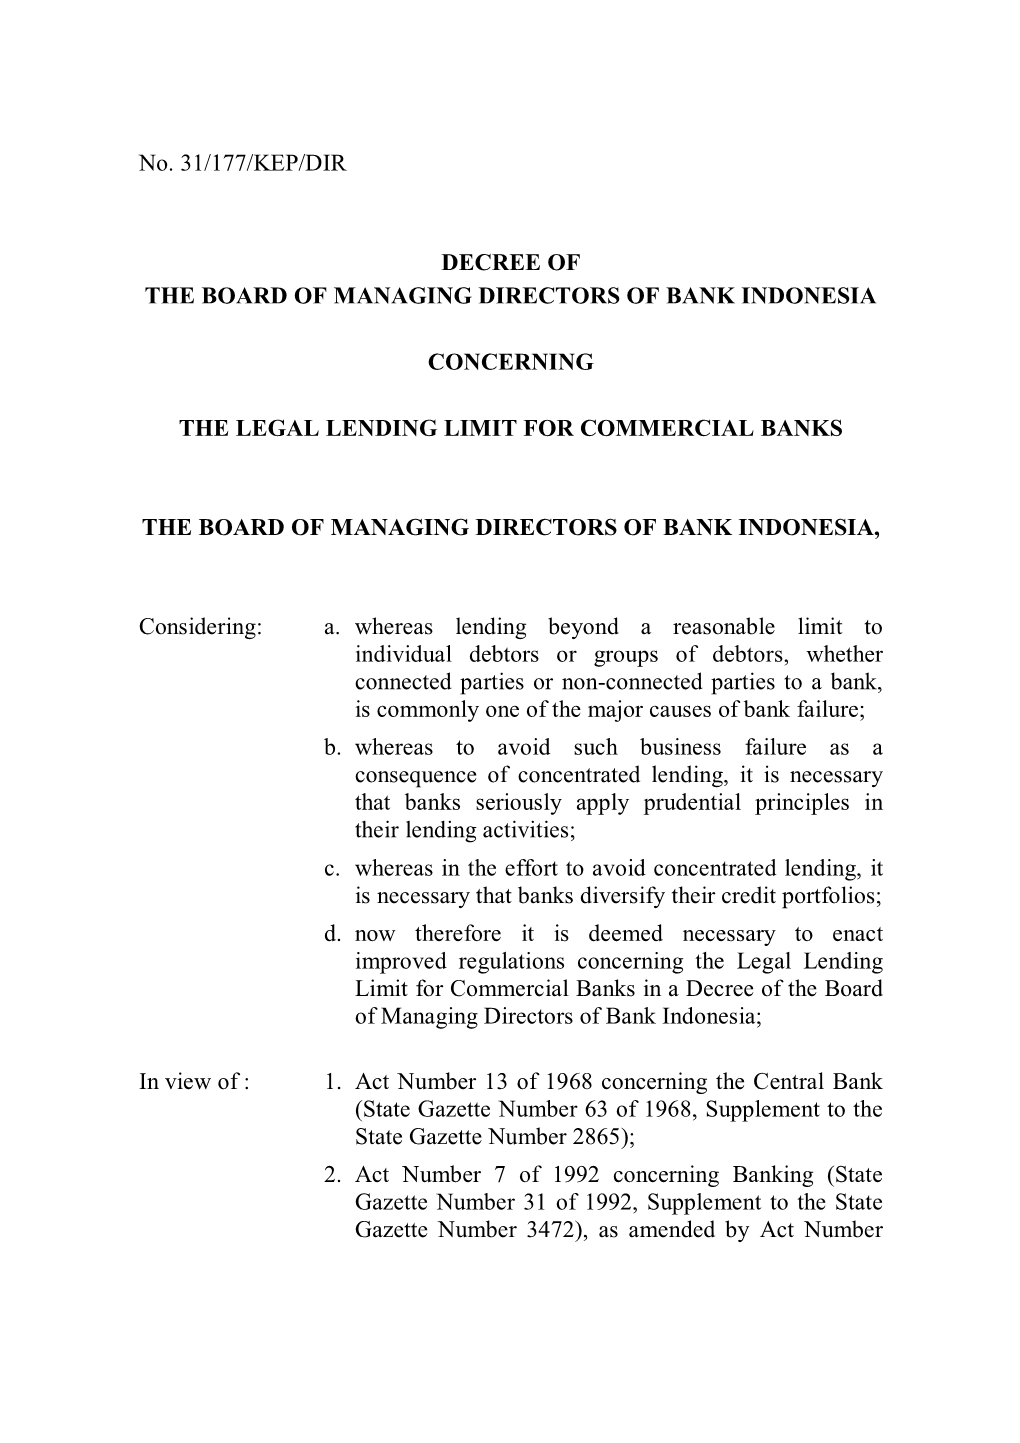 Decree of the Board of Managing Directors of Bank Indonesia